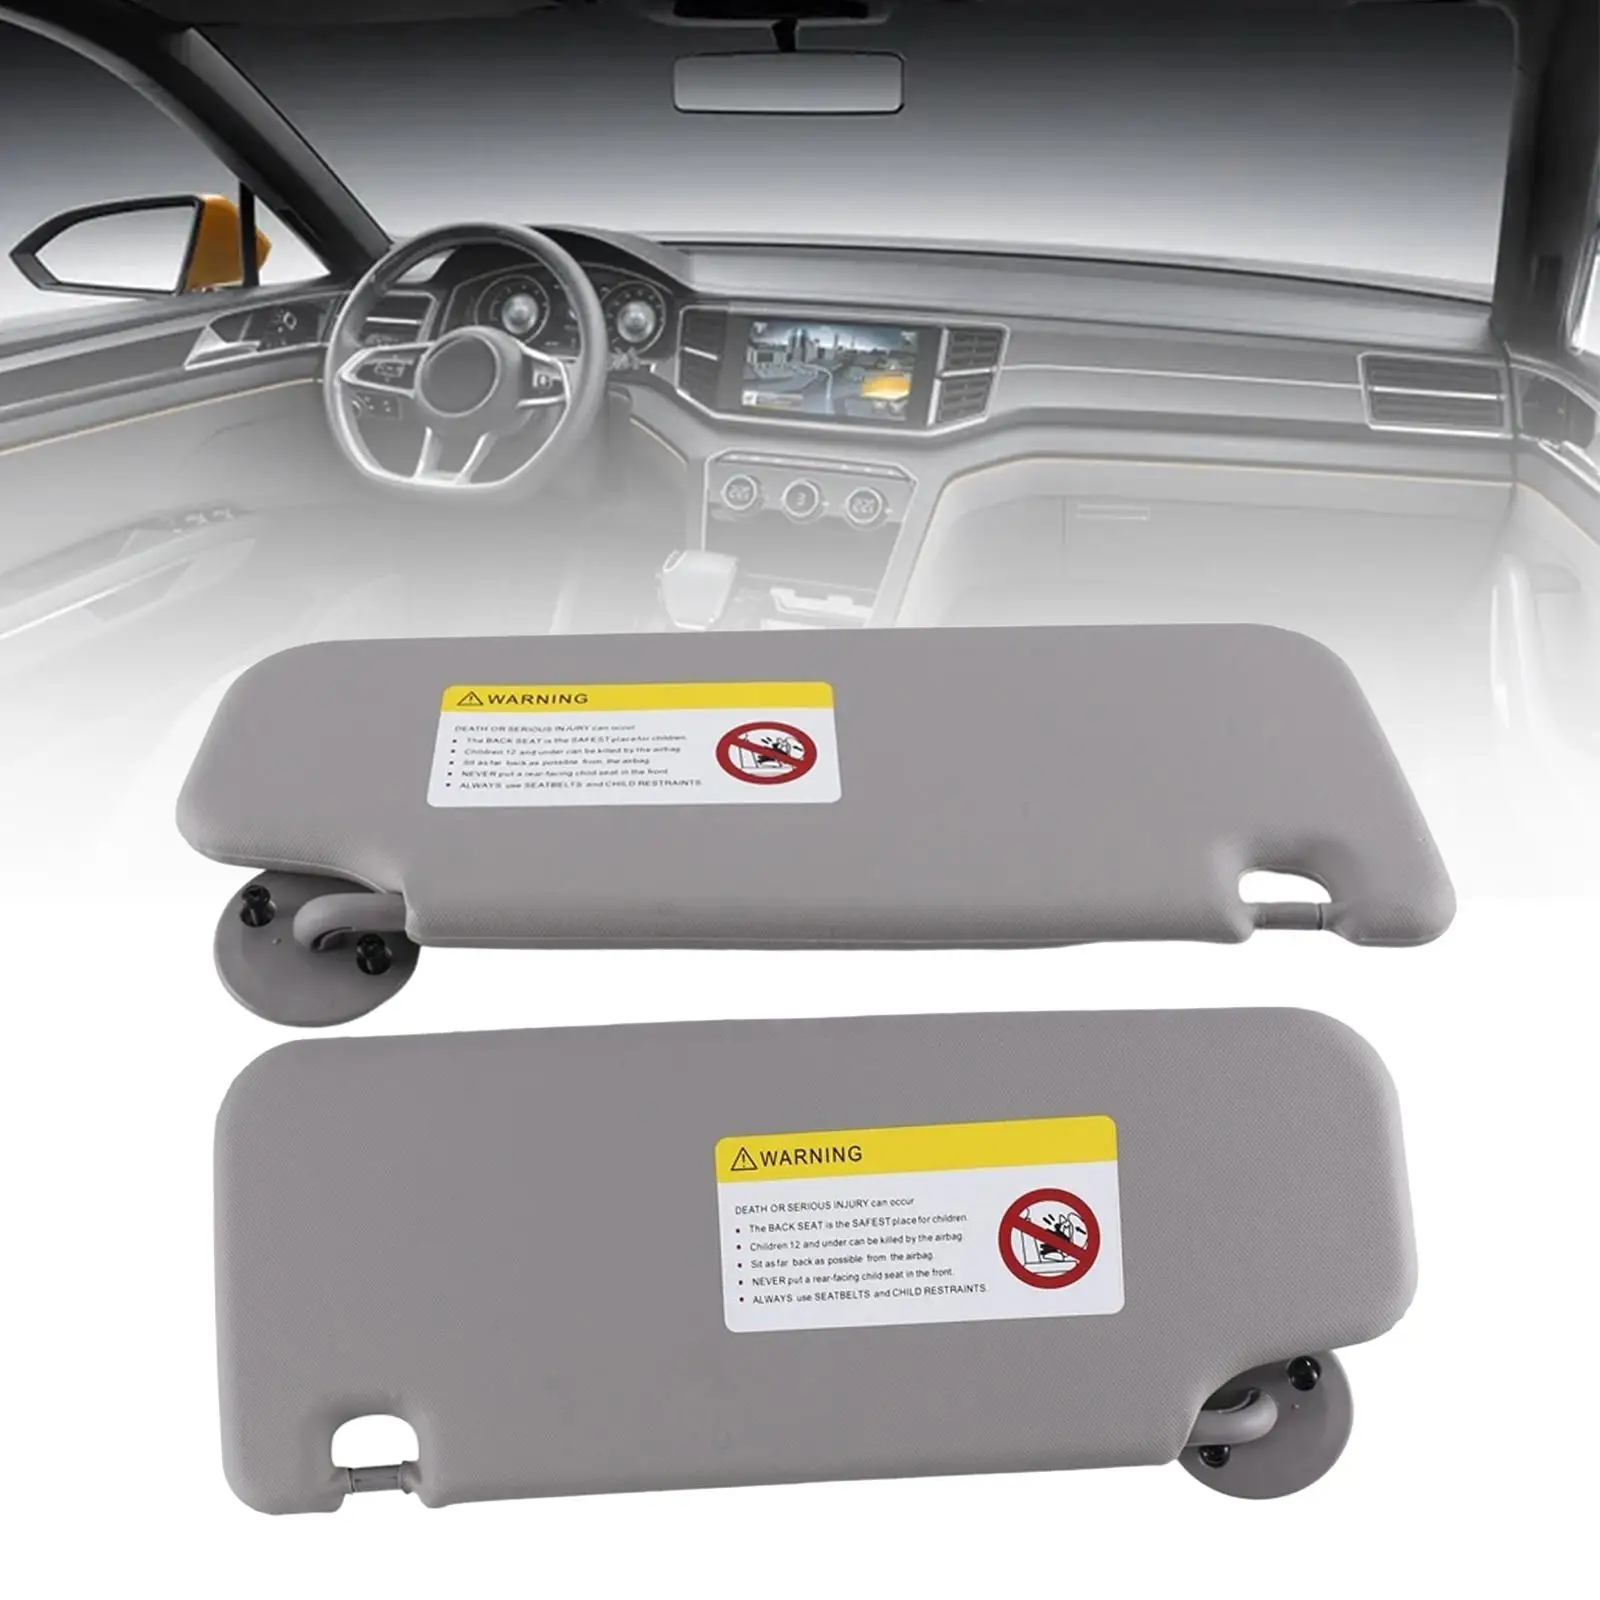 2x Windshield Sun Visor P95327509 P95327507 Left Right Side Automotive Parts Repair Assembly for Chevy Sonic Aveo 2012-2016